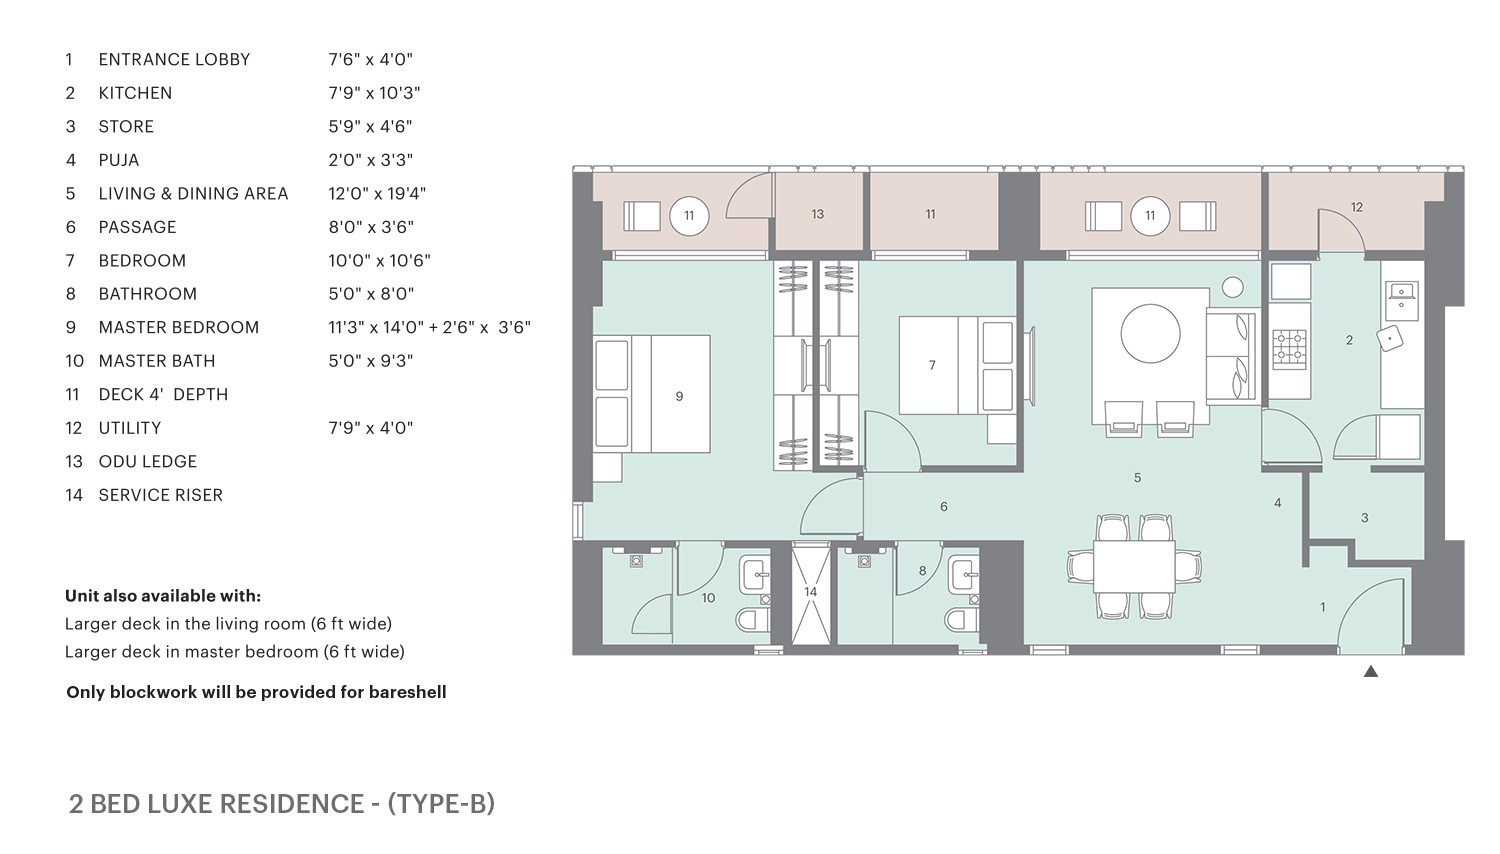 2 BED LUXE RESIDENCE TYPE B